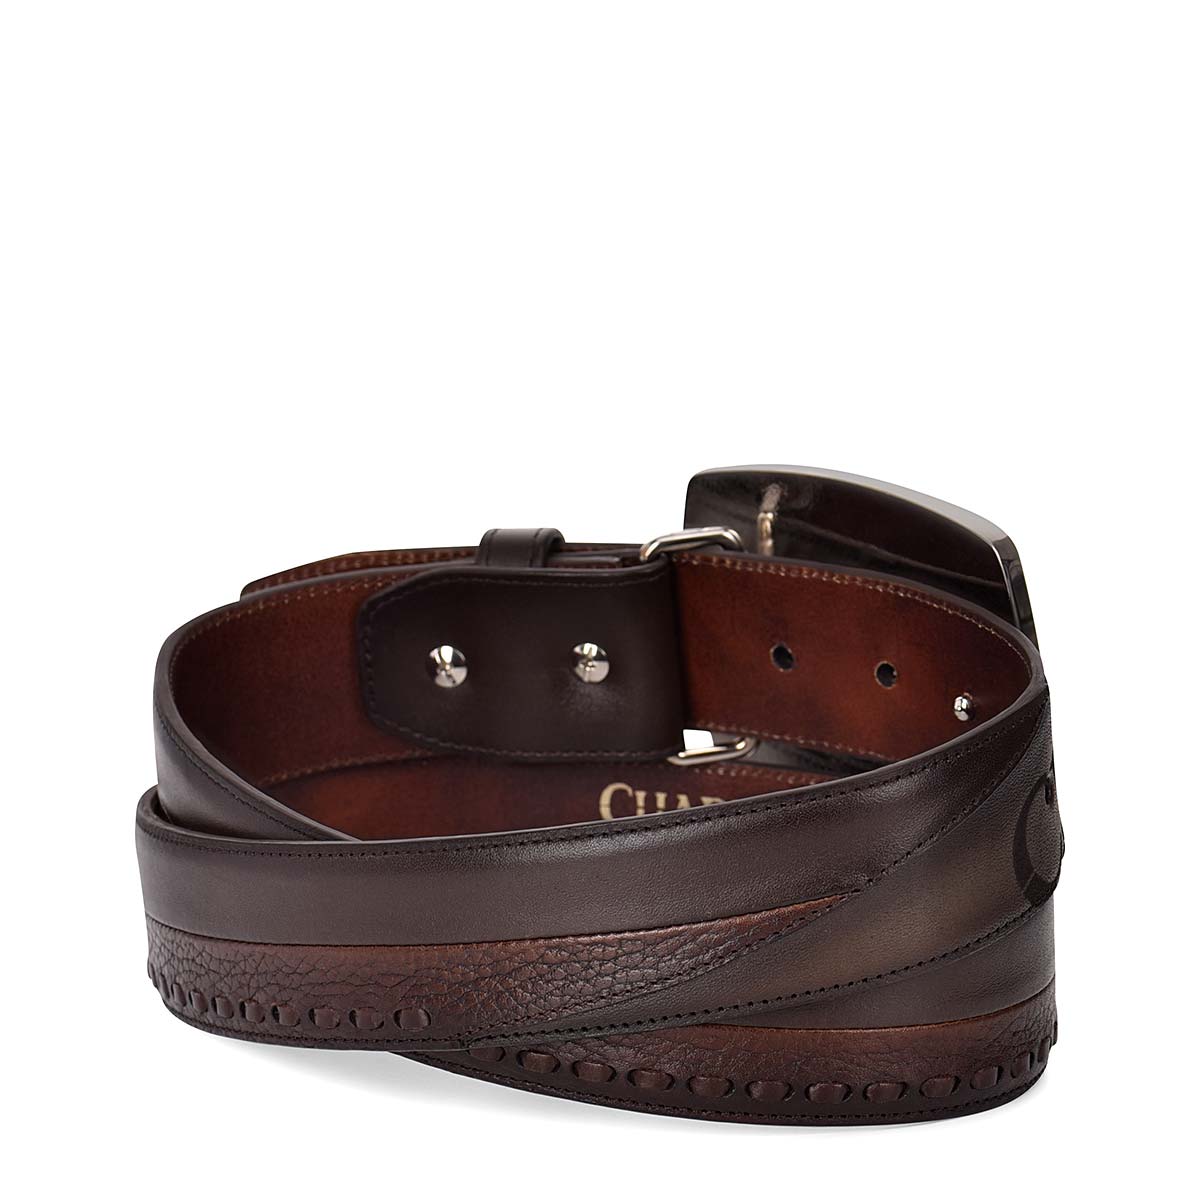 Hand-painted chocolate brown leather western belt 2